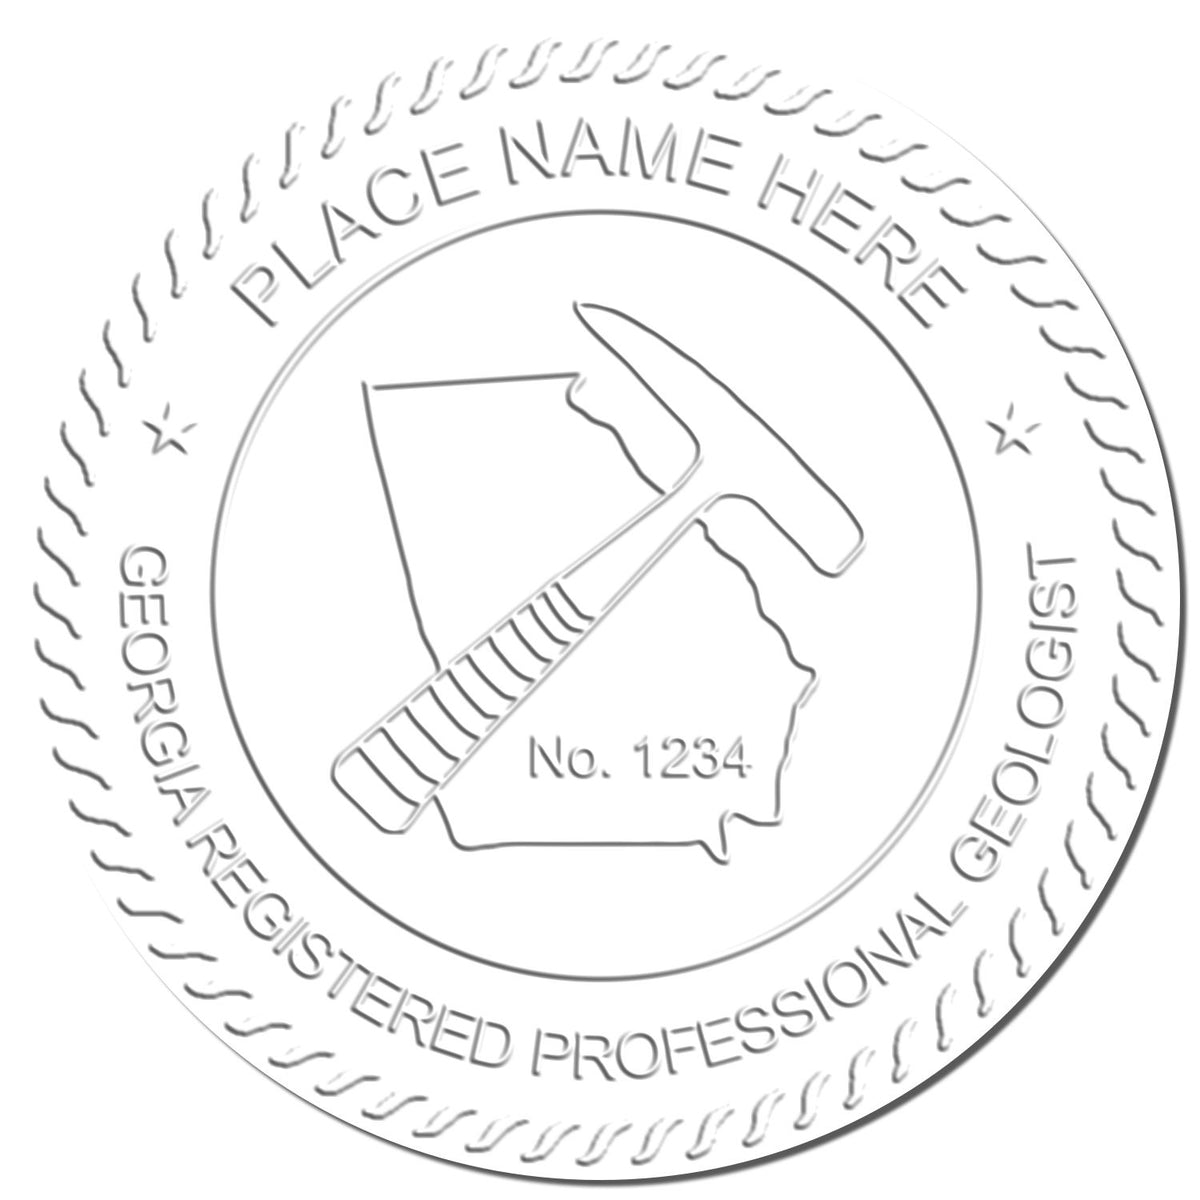 A photograph of the Hybrid Georgia Geologist Seal stamp impression reveals a vivid, professional image of the on paper.